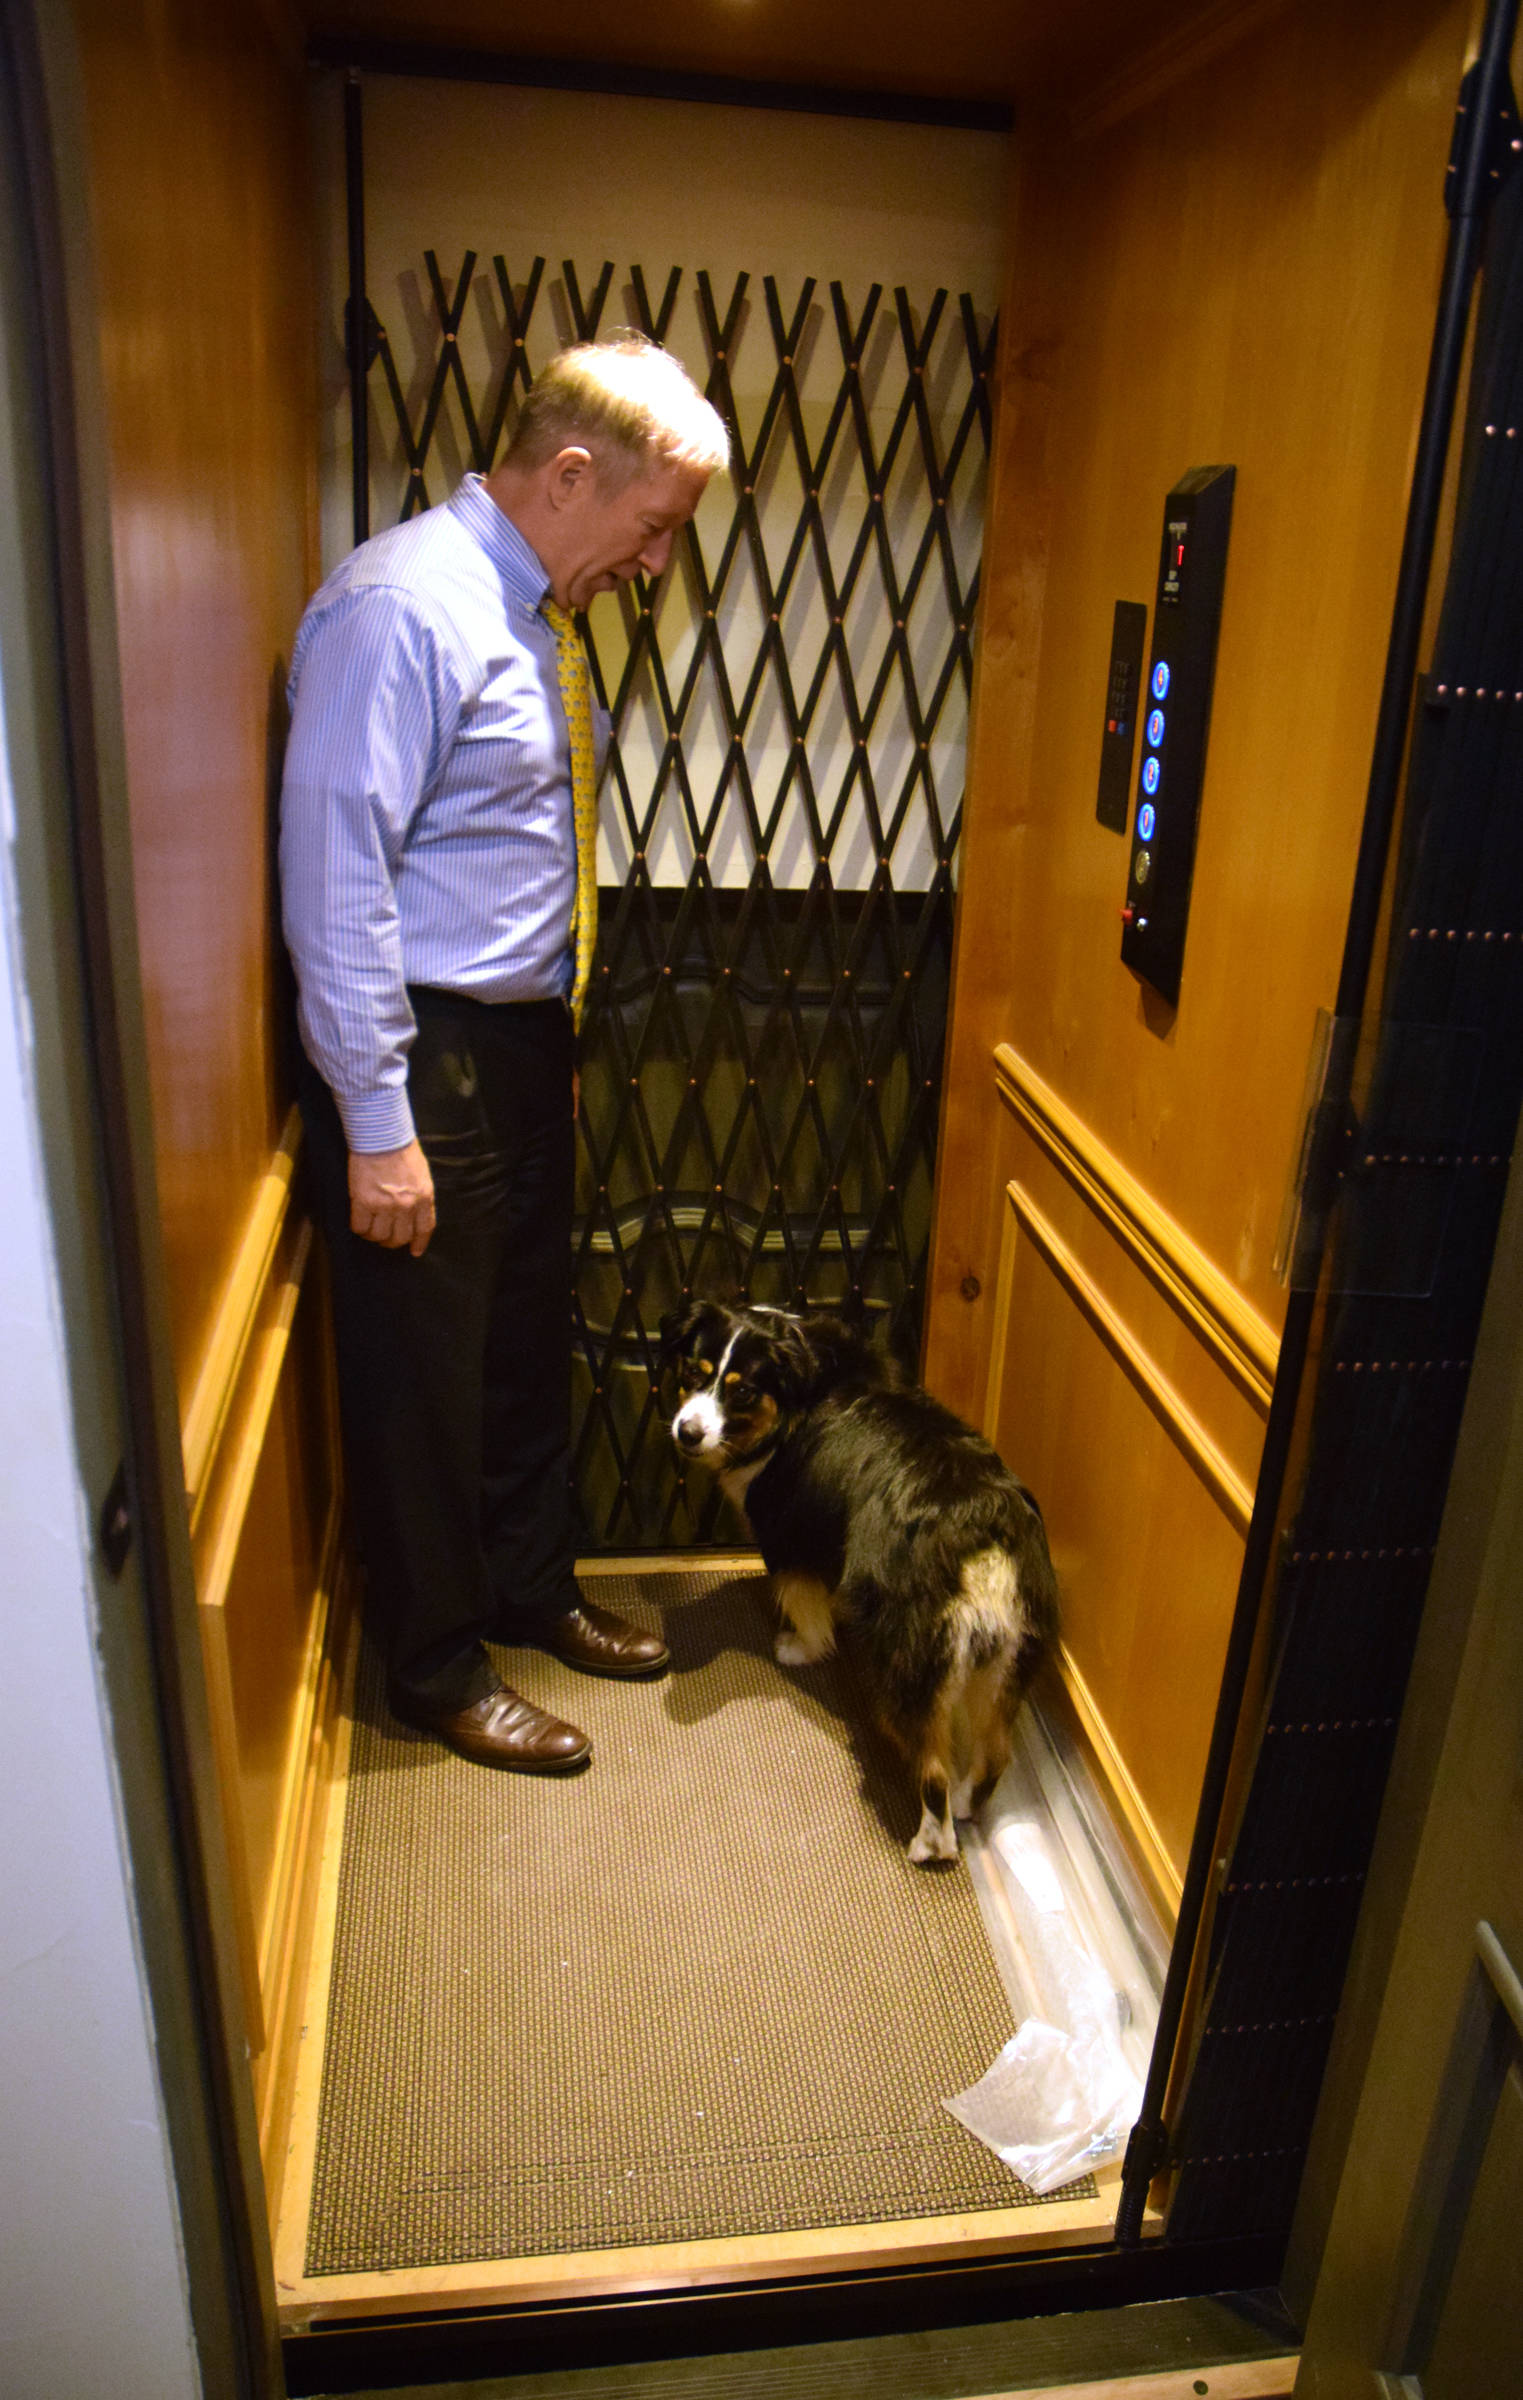 Mark Choate rides the elevator of his new house with his dog, Obi Wan Kenobi, on Thursday, July 6, 2017. (James Brooks | Juneau Empire)